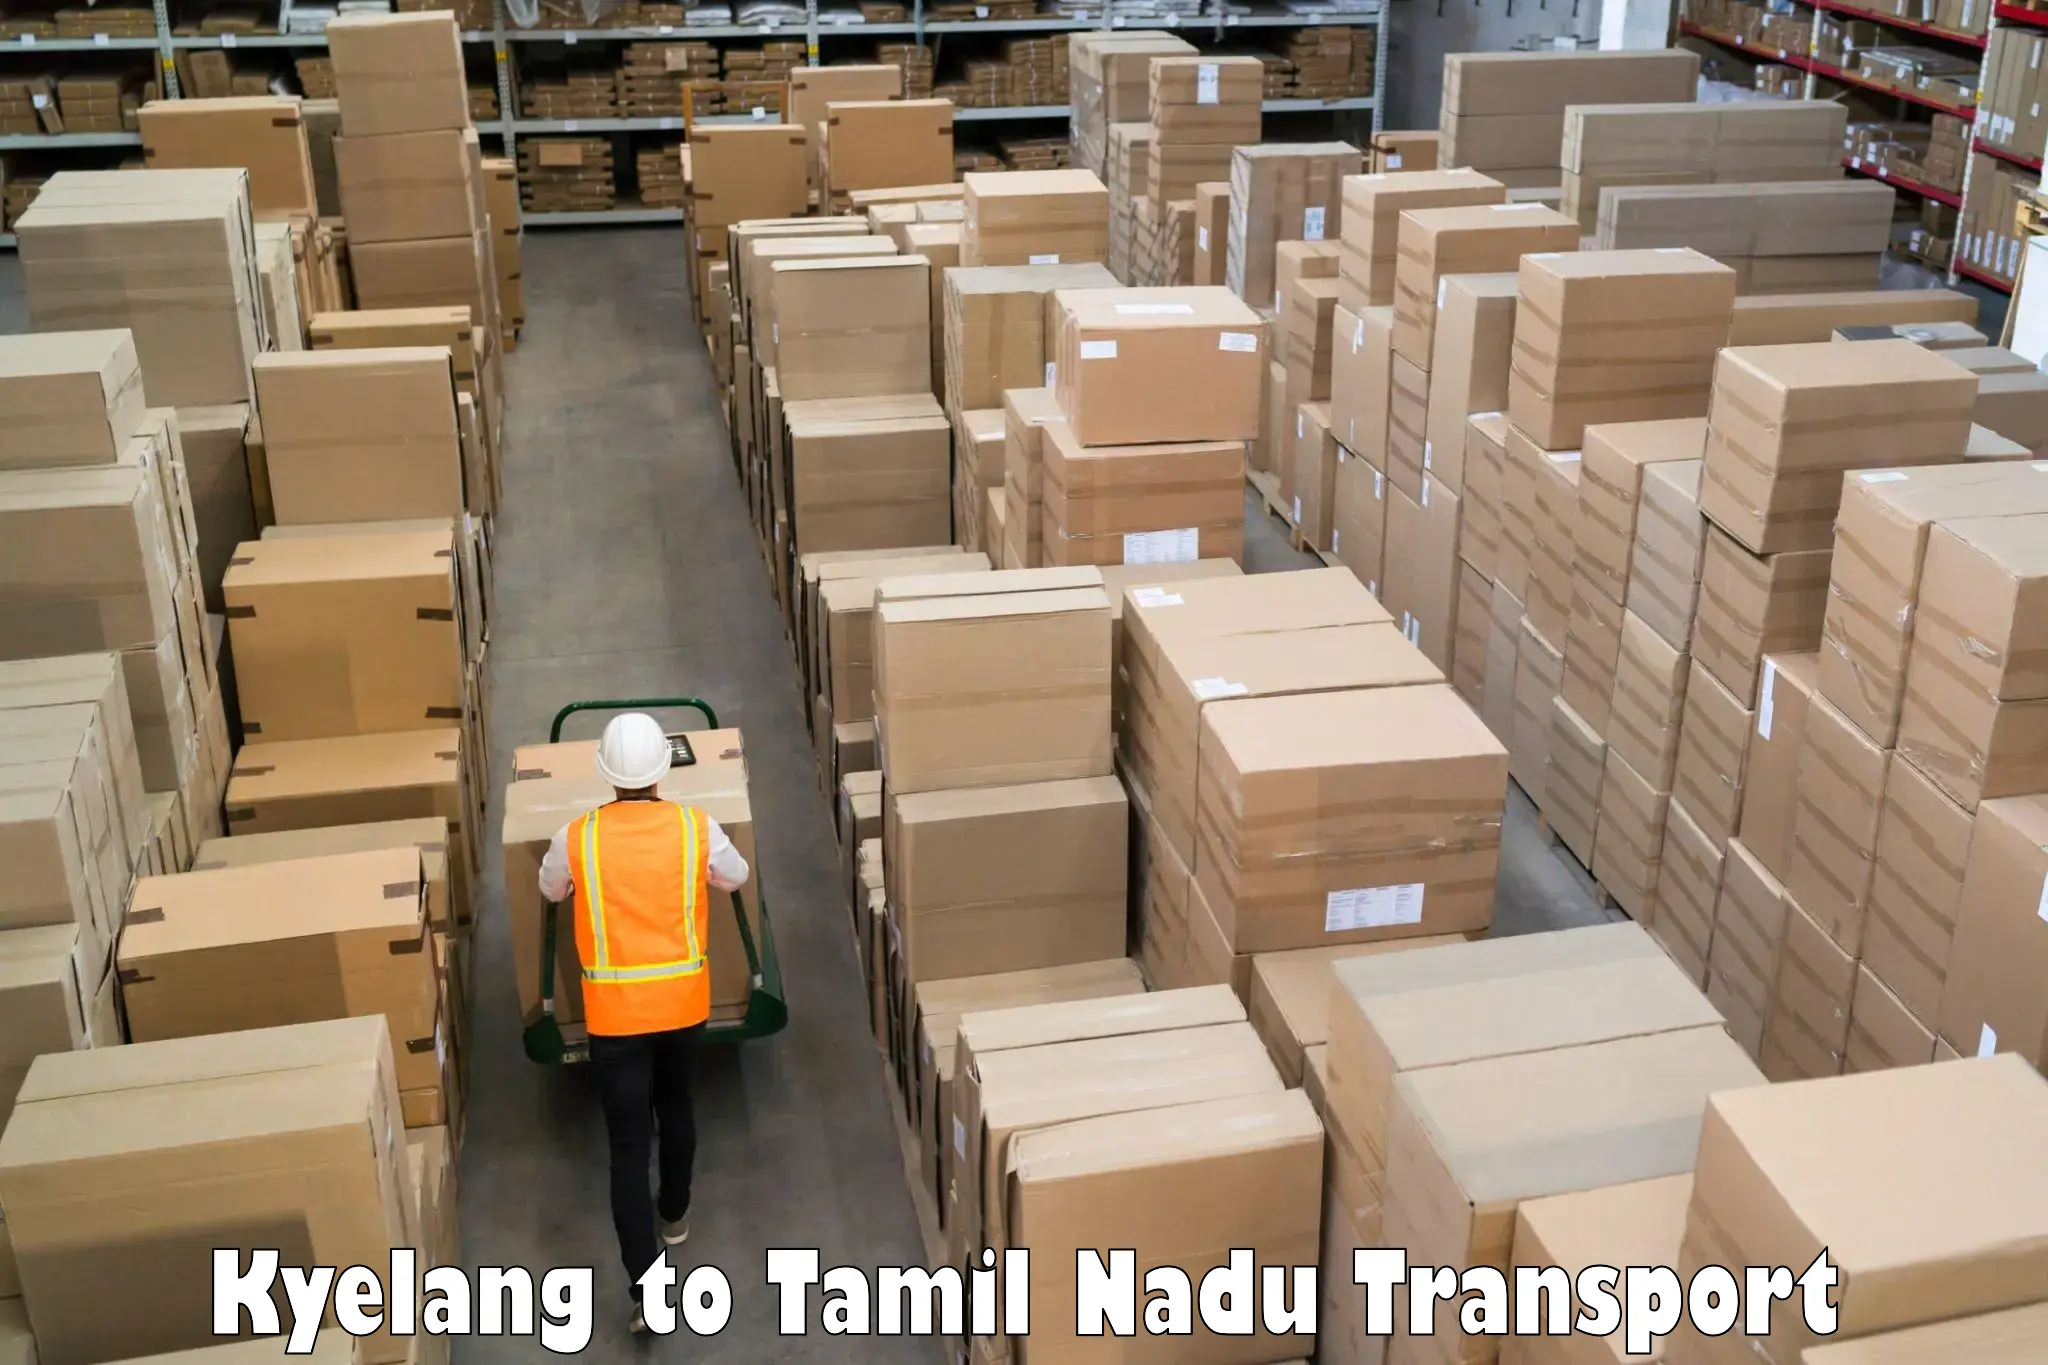 Land transport services Kyelang to Karunya Institute of Technology and Sciences Coimbatore